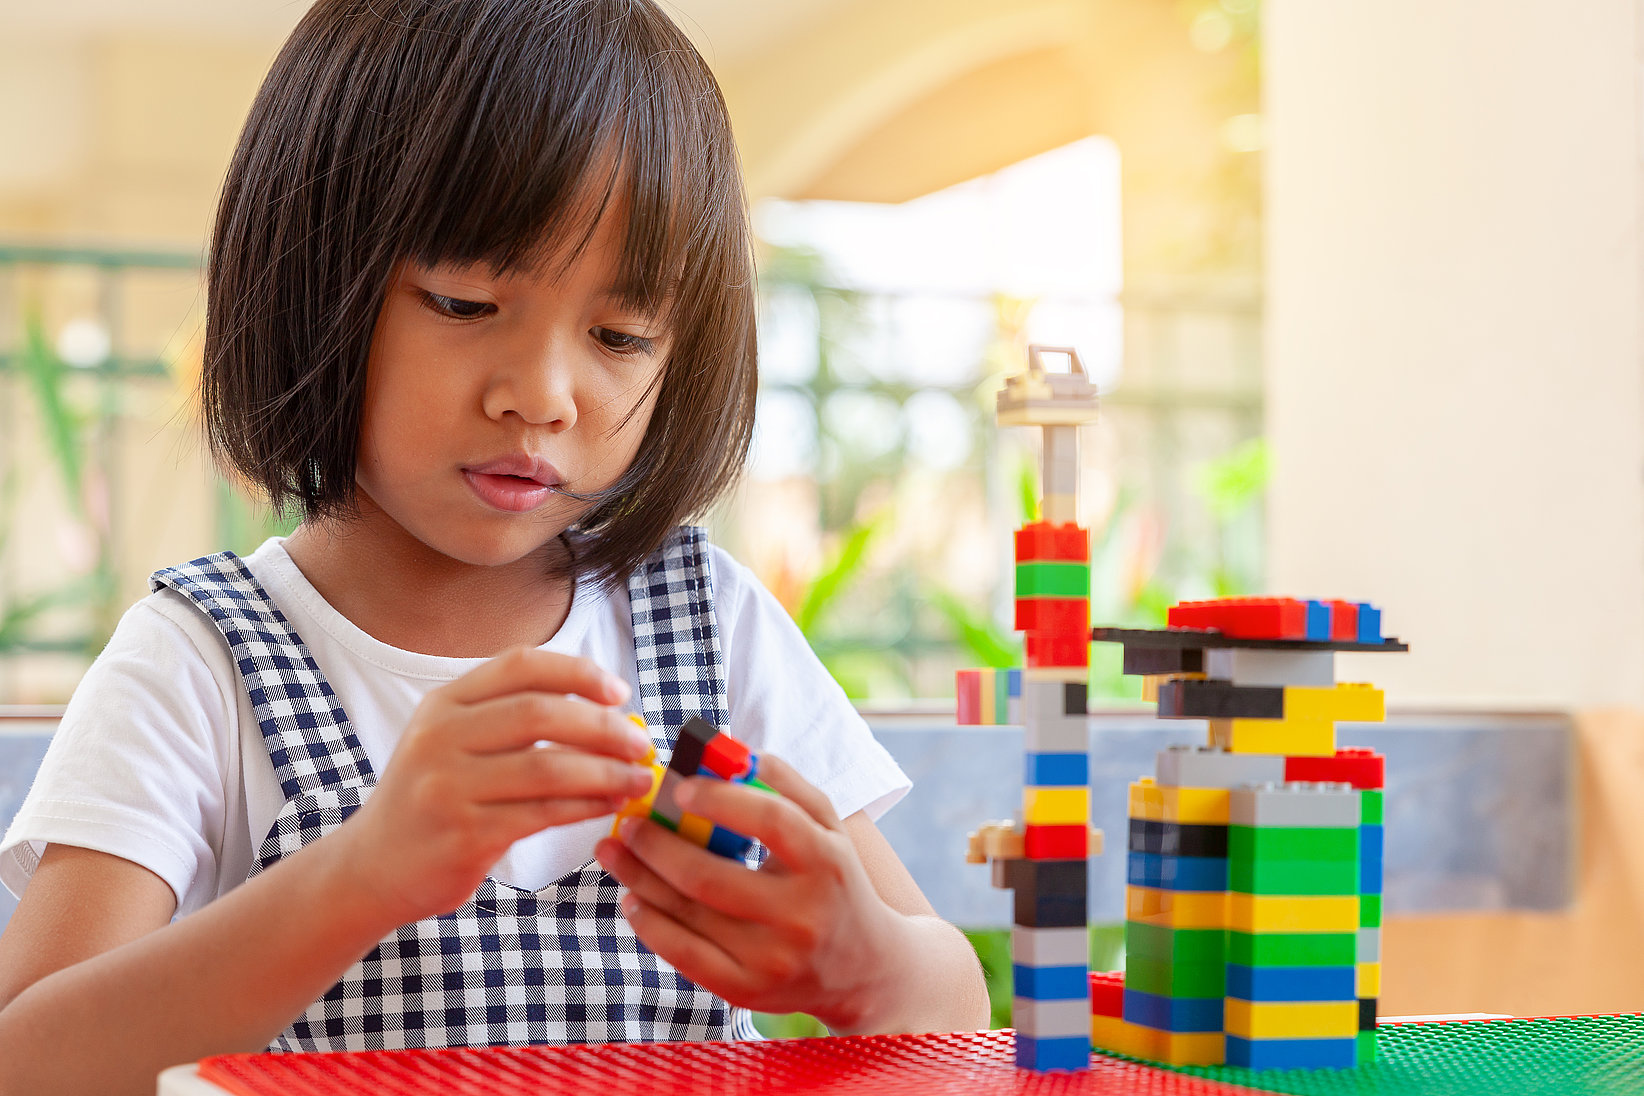 Little girl playing peacefully with "Lego"-building blocks.